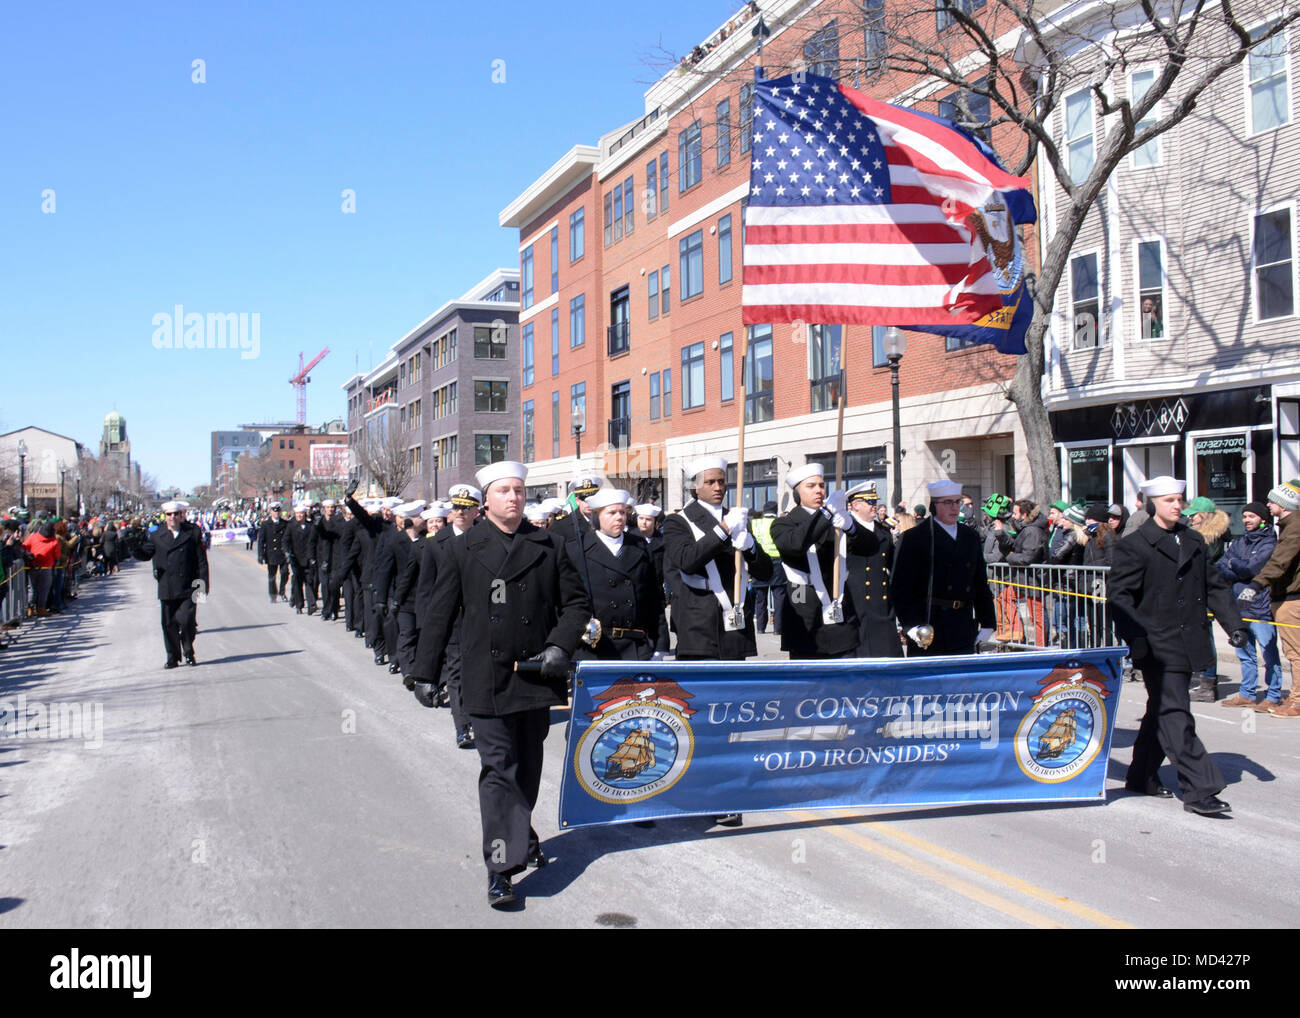 180318-N-SM577-0105 BOSTON (March 18, 2018) Sailors assigned to USS Constitution march through the streets of Boston during its annual Evacuation Day Parade. The parade commemorates the day that British troops evacuated Boston during the American Revolutionary War, which took place on March 17, 1776. (U.S. Navy photo by Mass Communication Specialist 3rd Class Casey Scoular/Released) Stock Photo